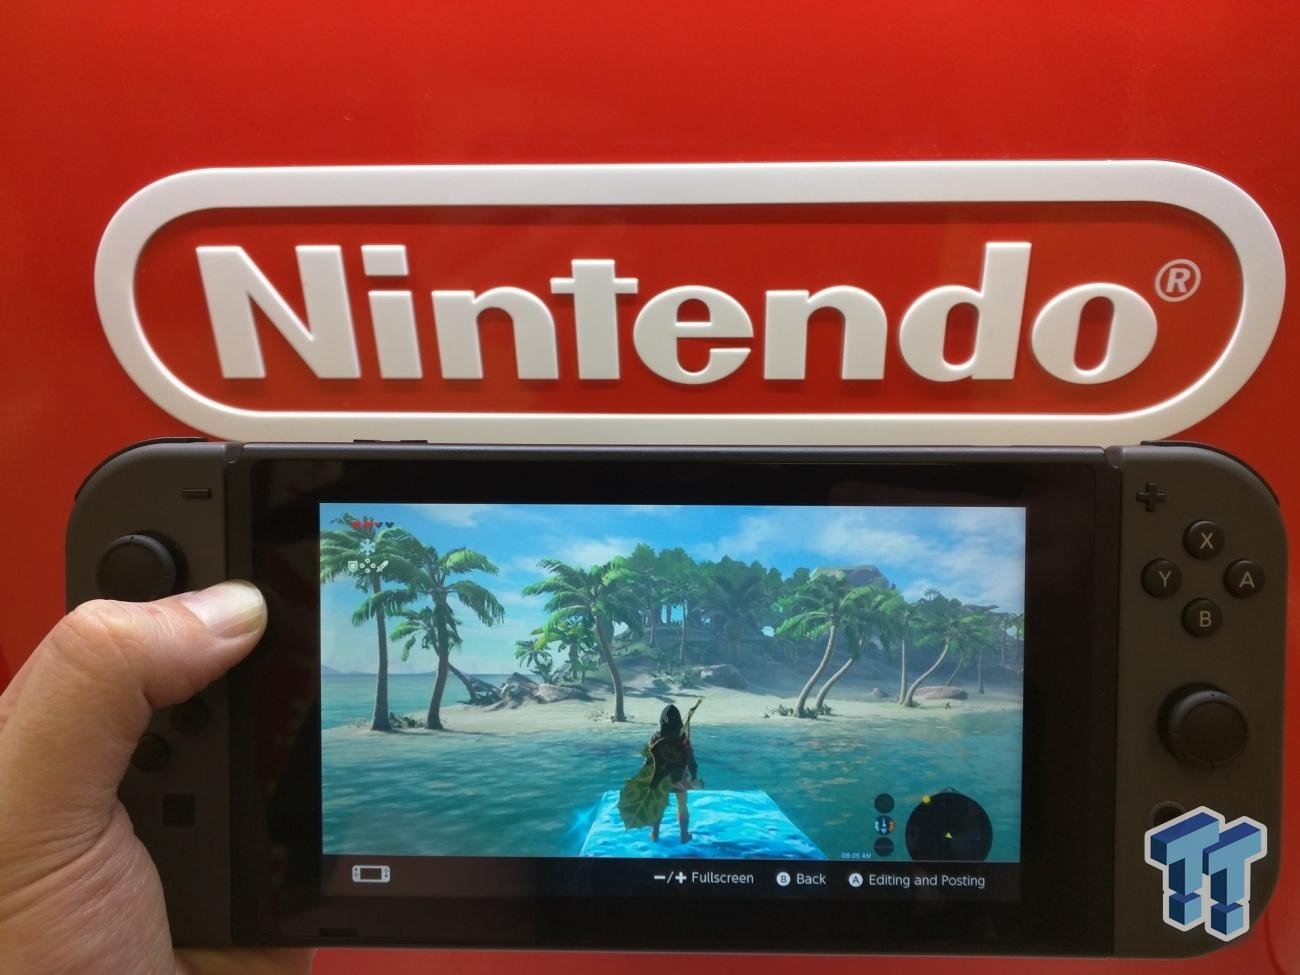 will there be a new switch in 2020